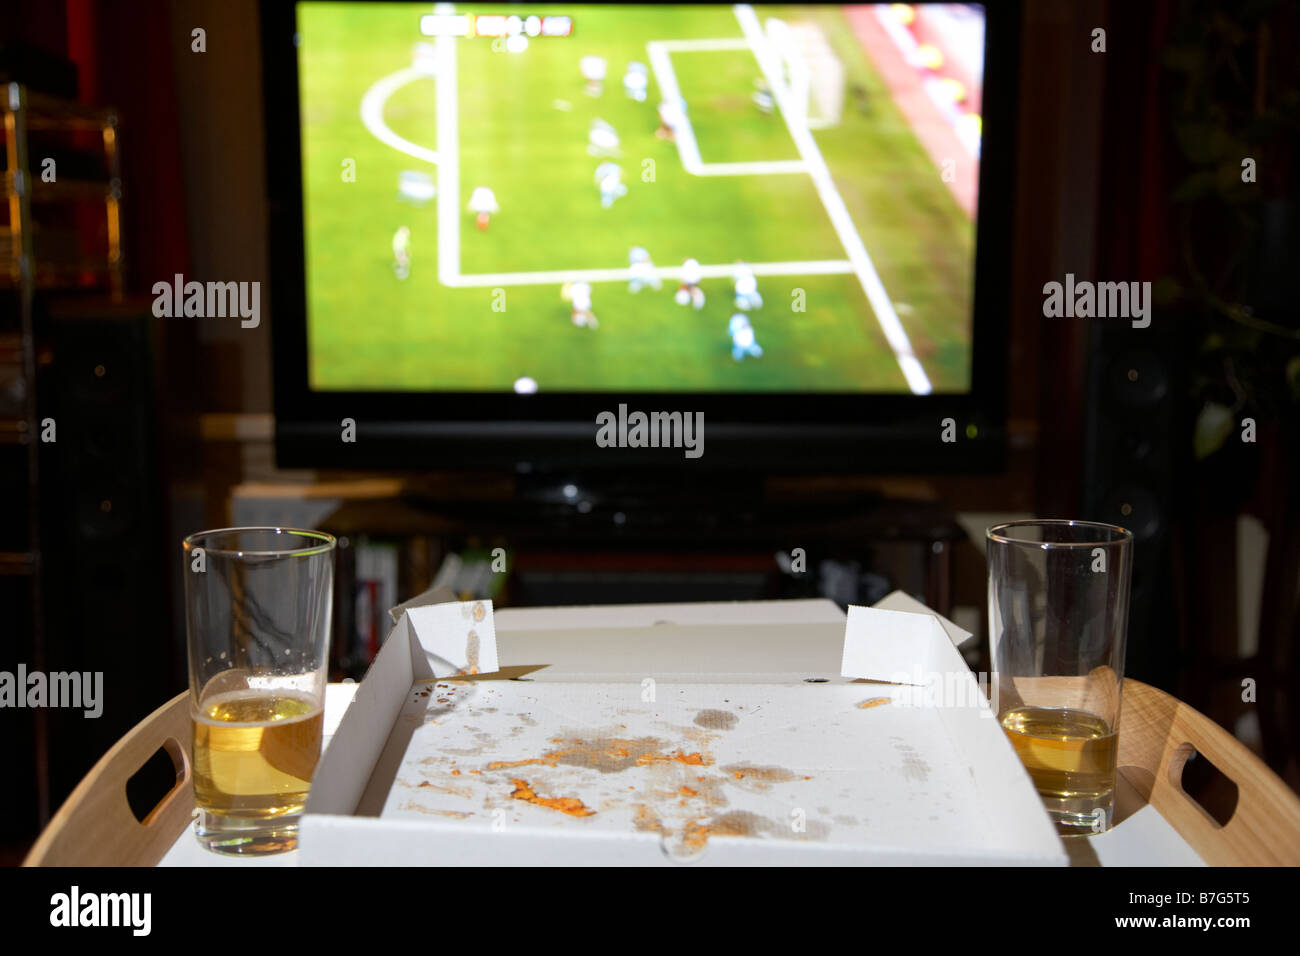 remains of a takeaway pizza meal for two and glasses of beer on a tray in front of soccer on the tv in the living room of house Stock Photo